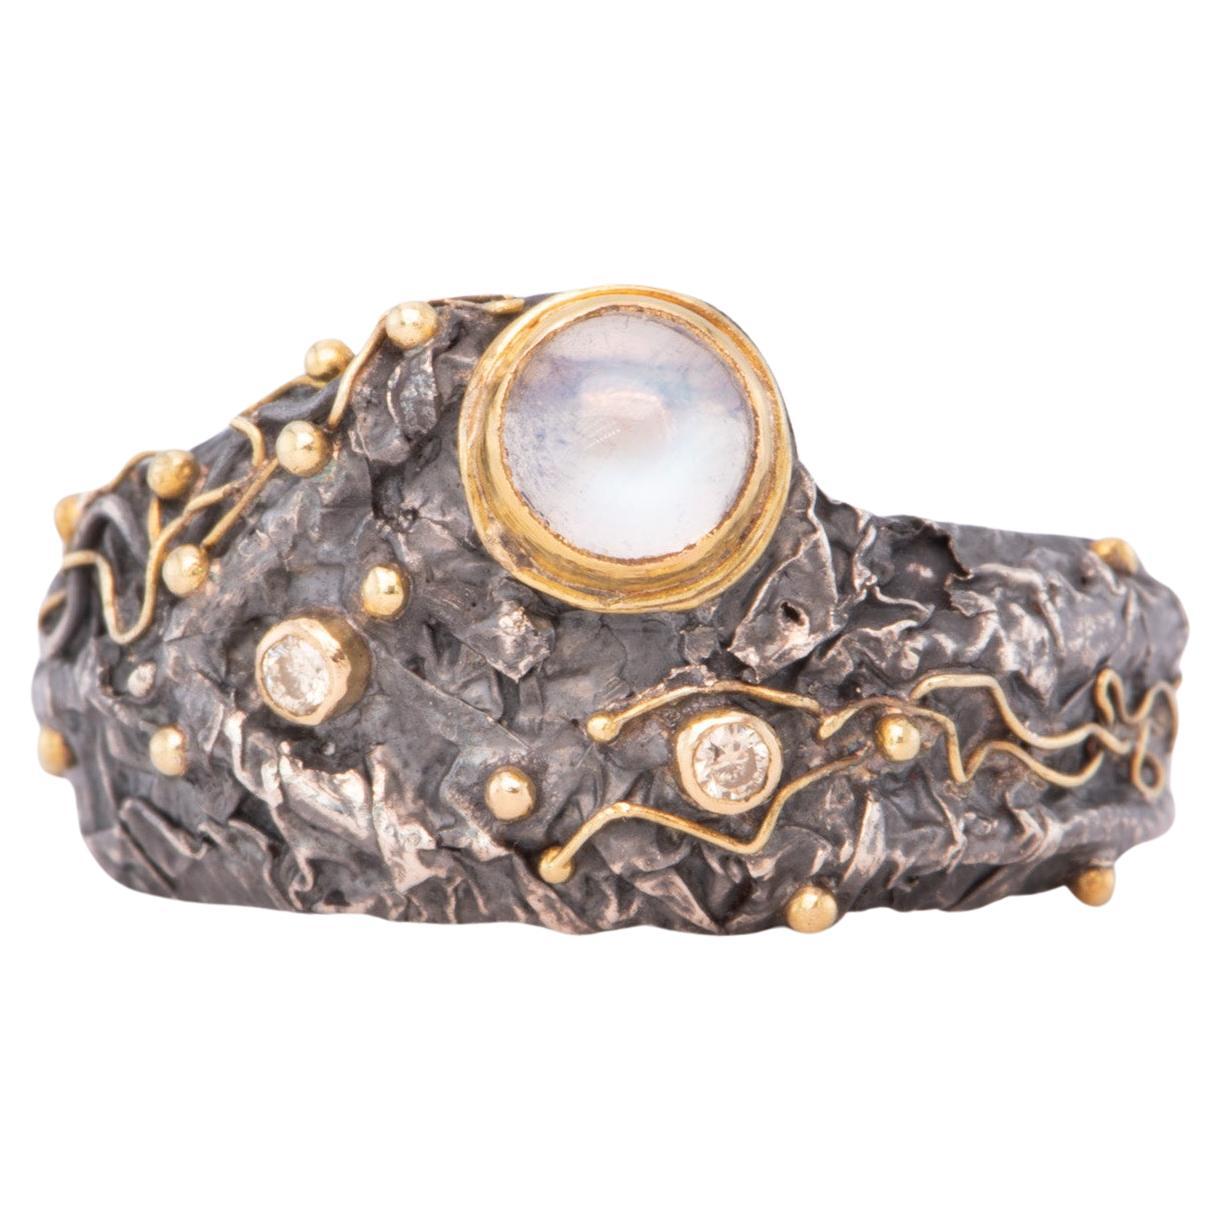 Unique Textured Wide Band Ring Moonstone Diamonds Sterling Silver 18K Gold R6645 For Sale